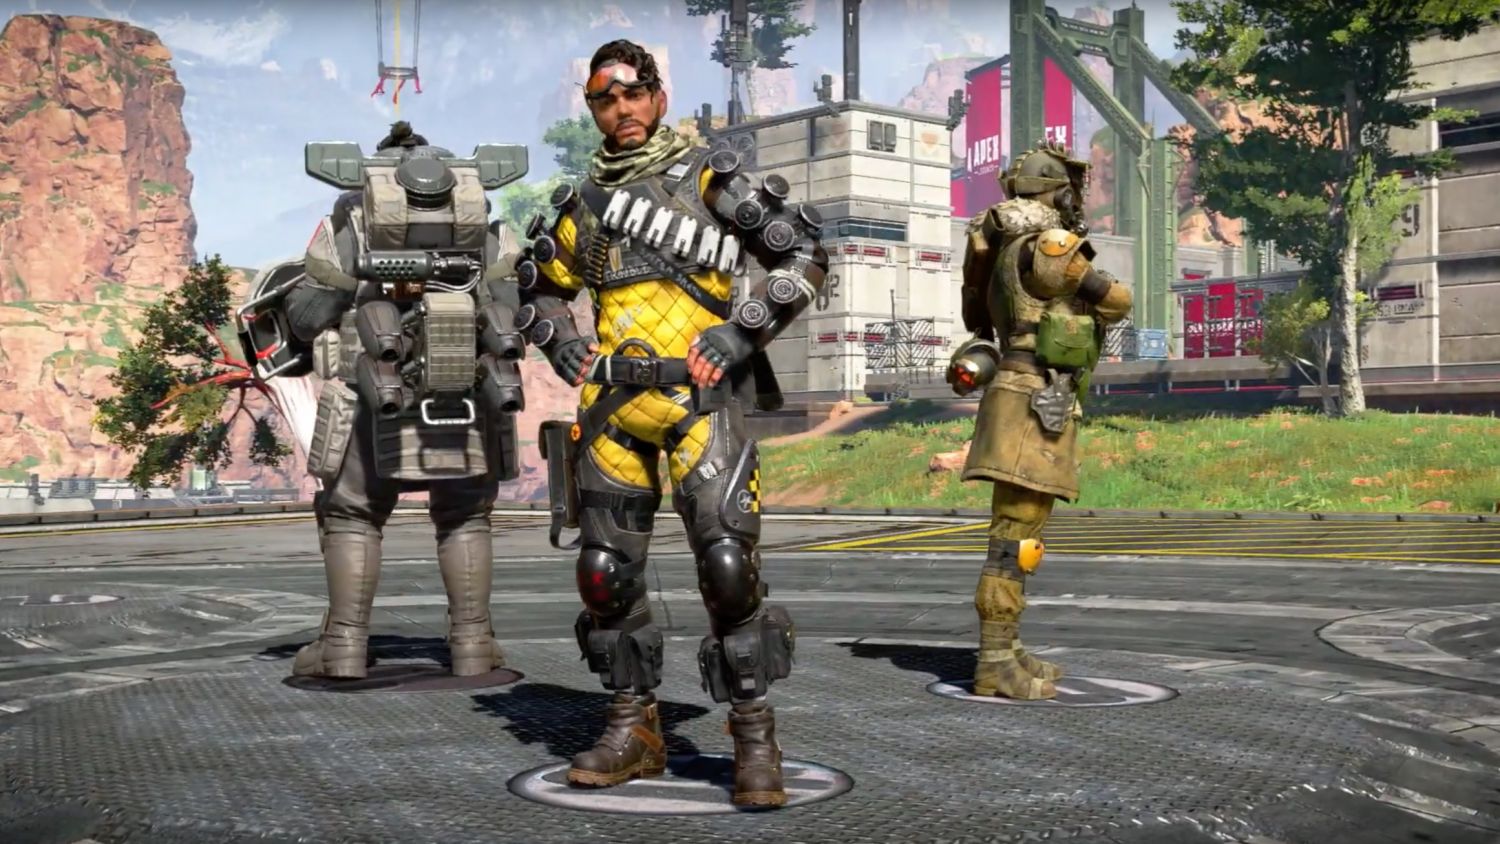 Apex Legends Mobile now available to download from Google Play